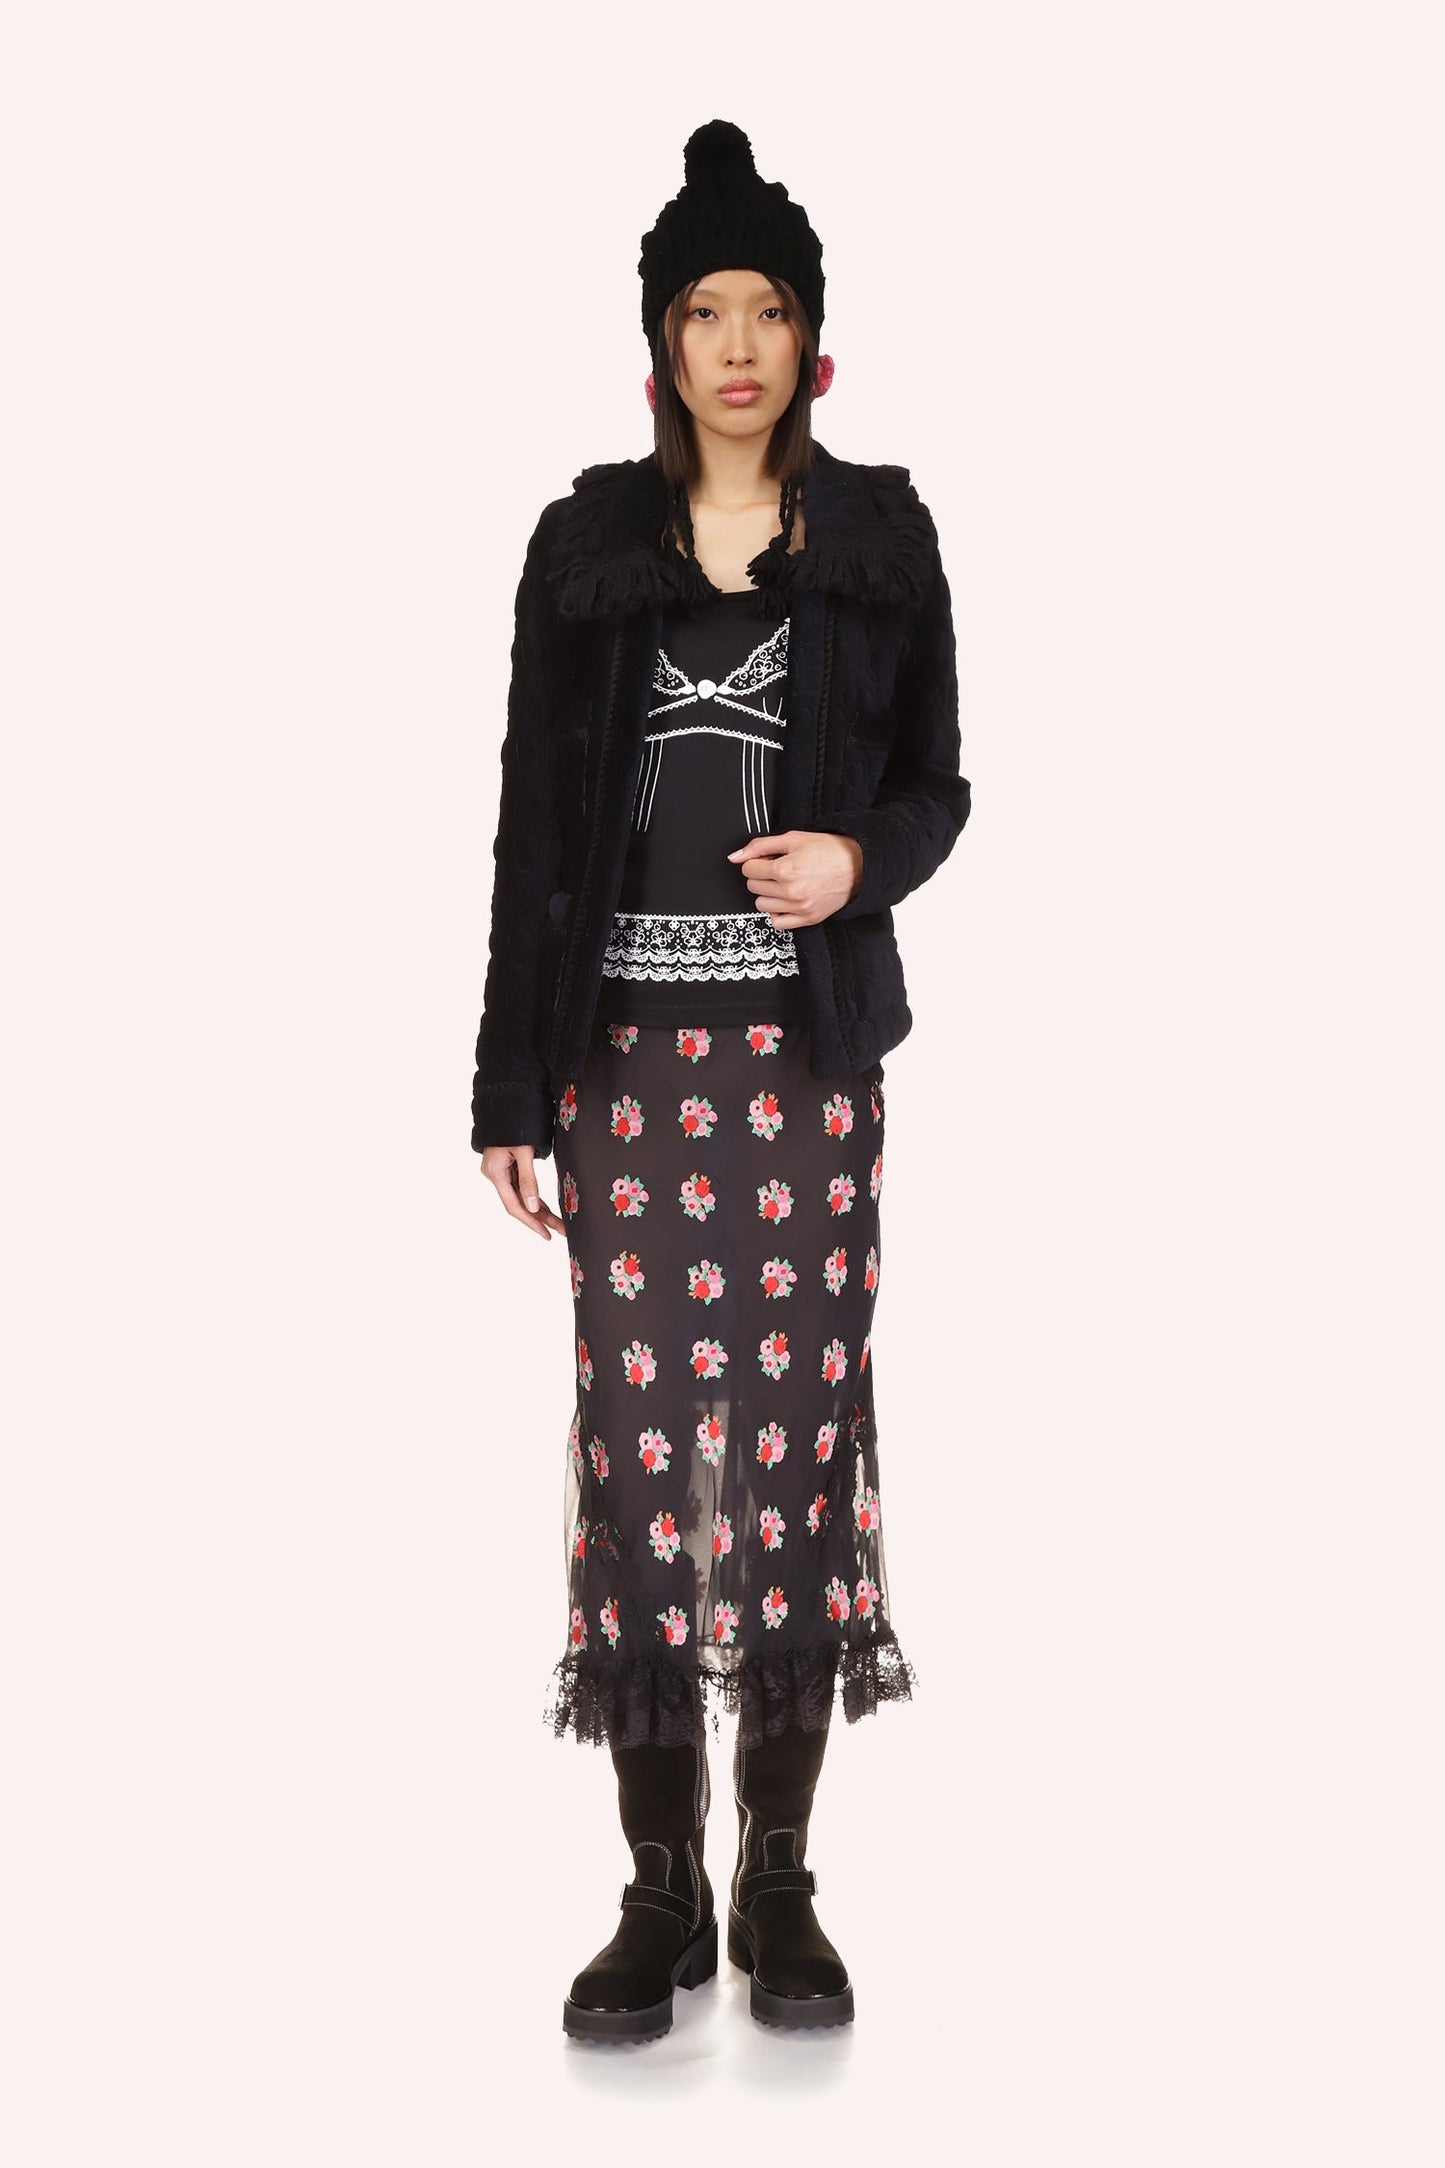 The Anna Sui Quilted Daisies Jacket in Black is a stunning, long-sleeved jacket